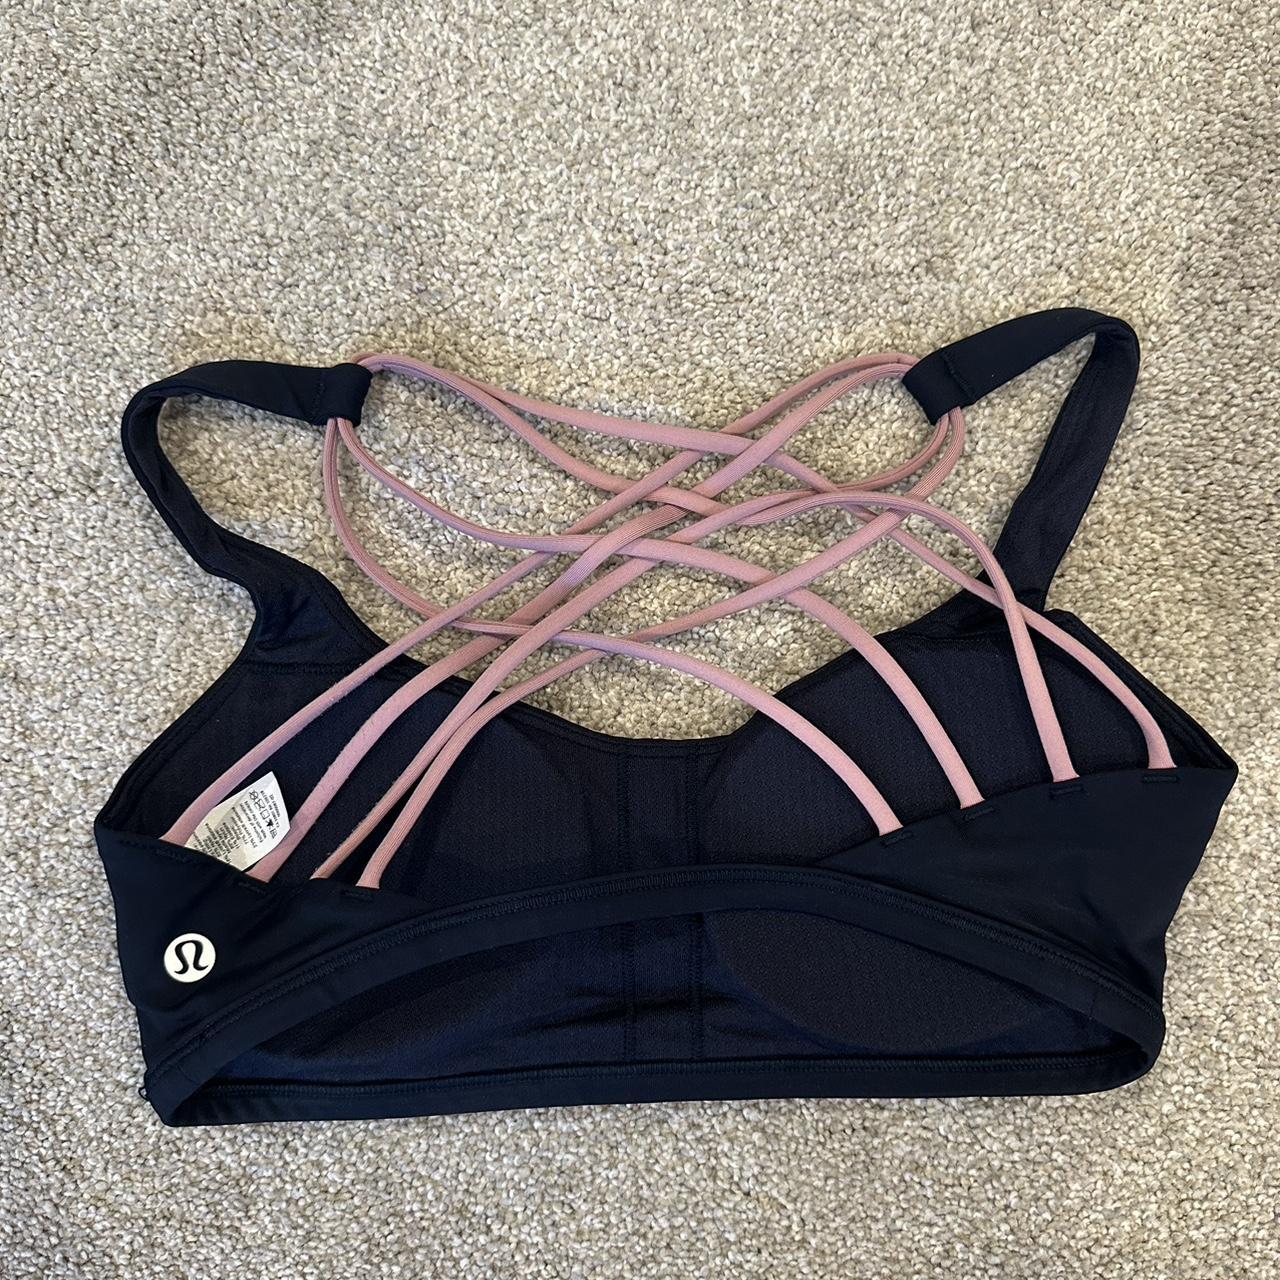 lululemon Y back sports bra there's for tag on this - Depop